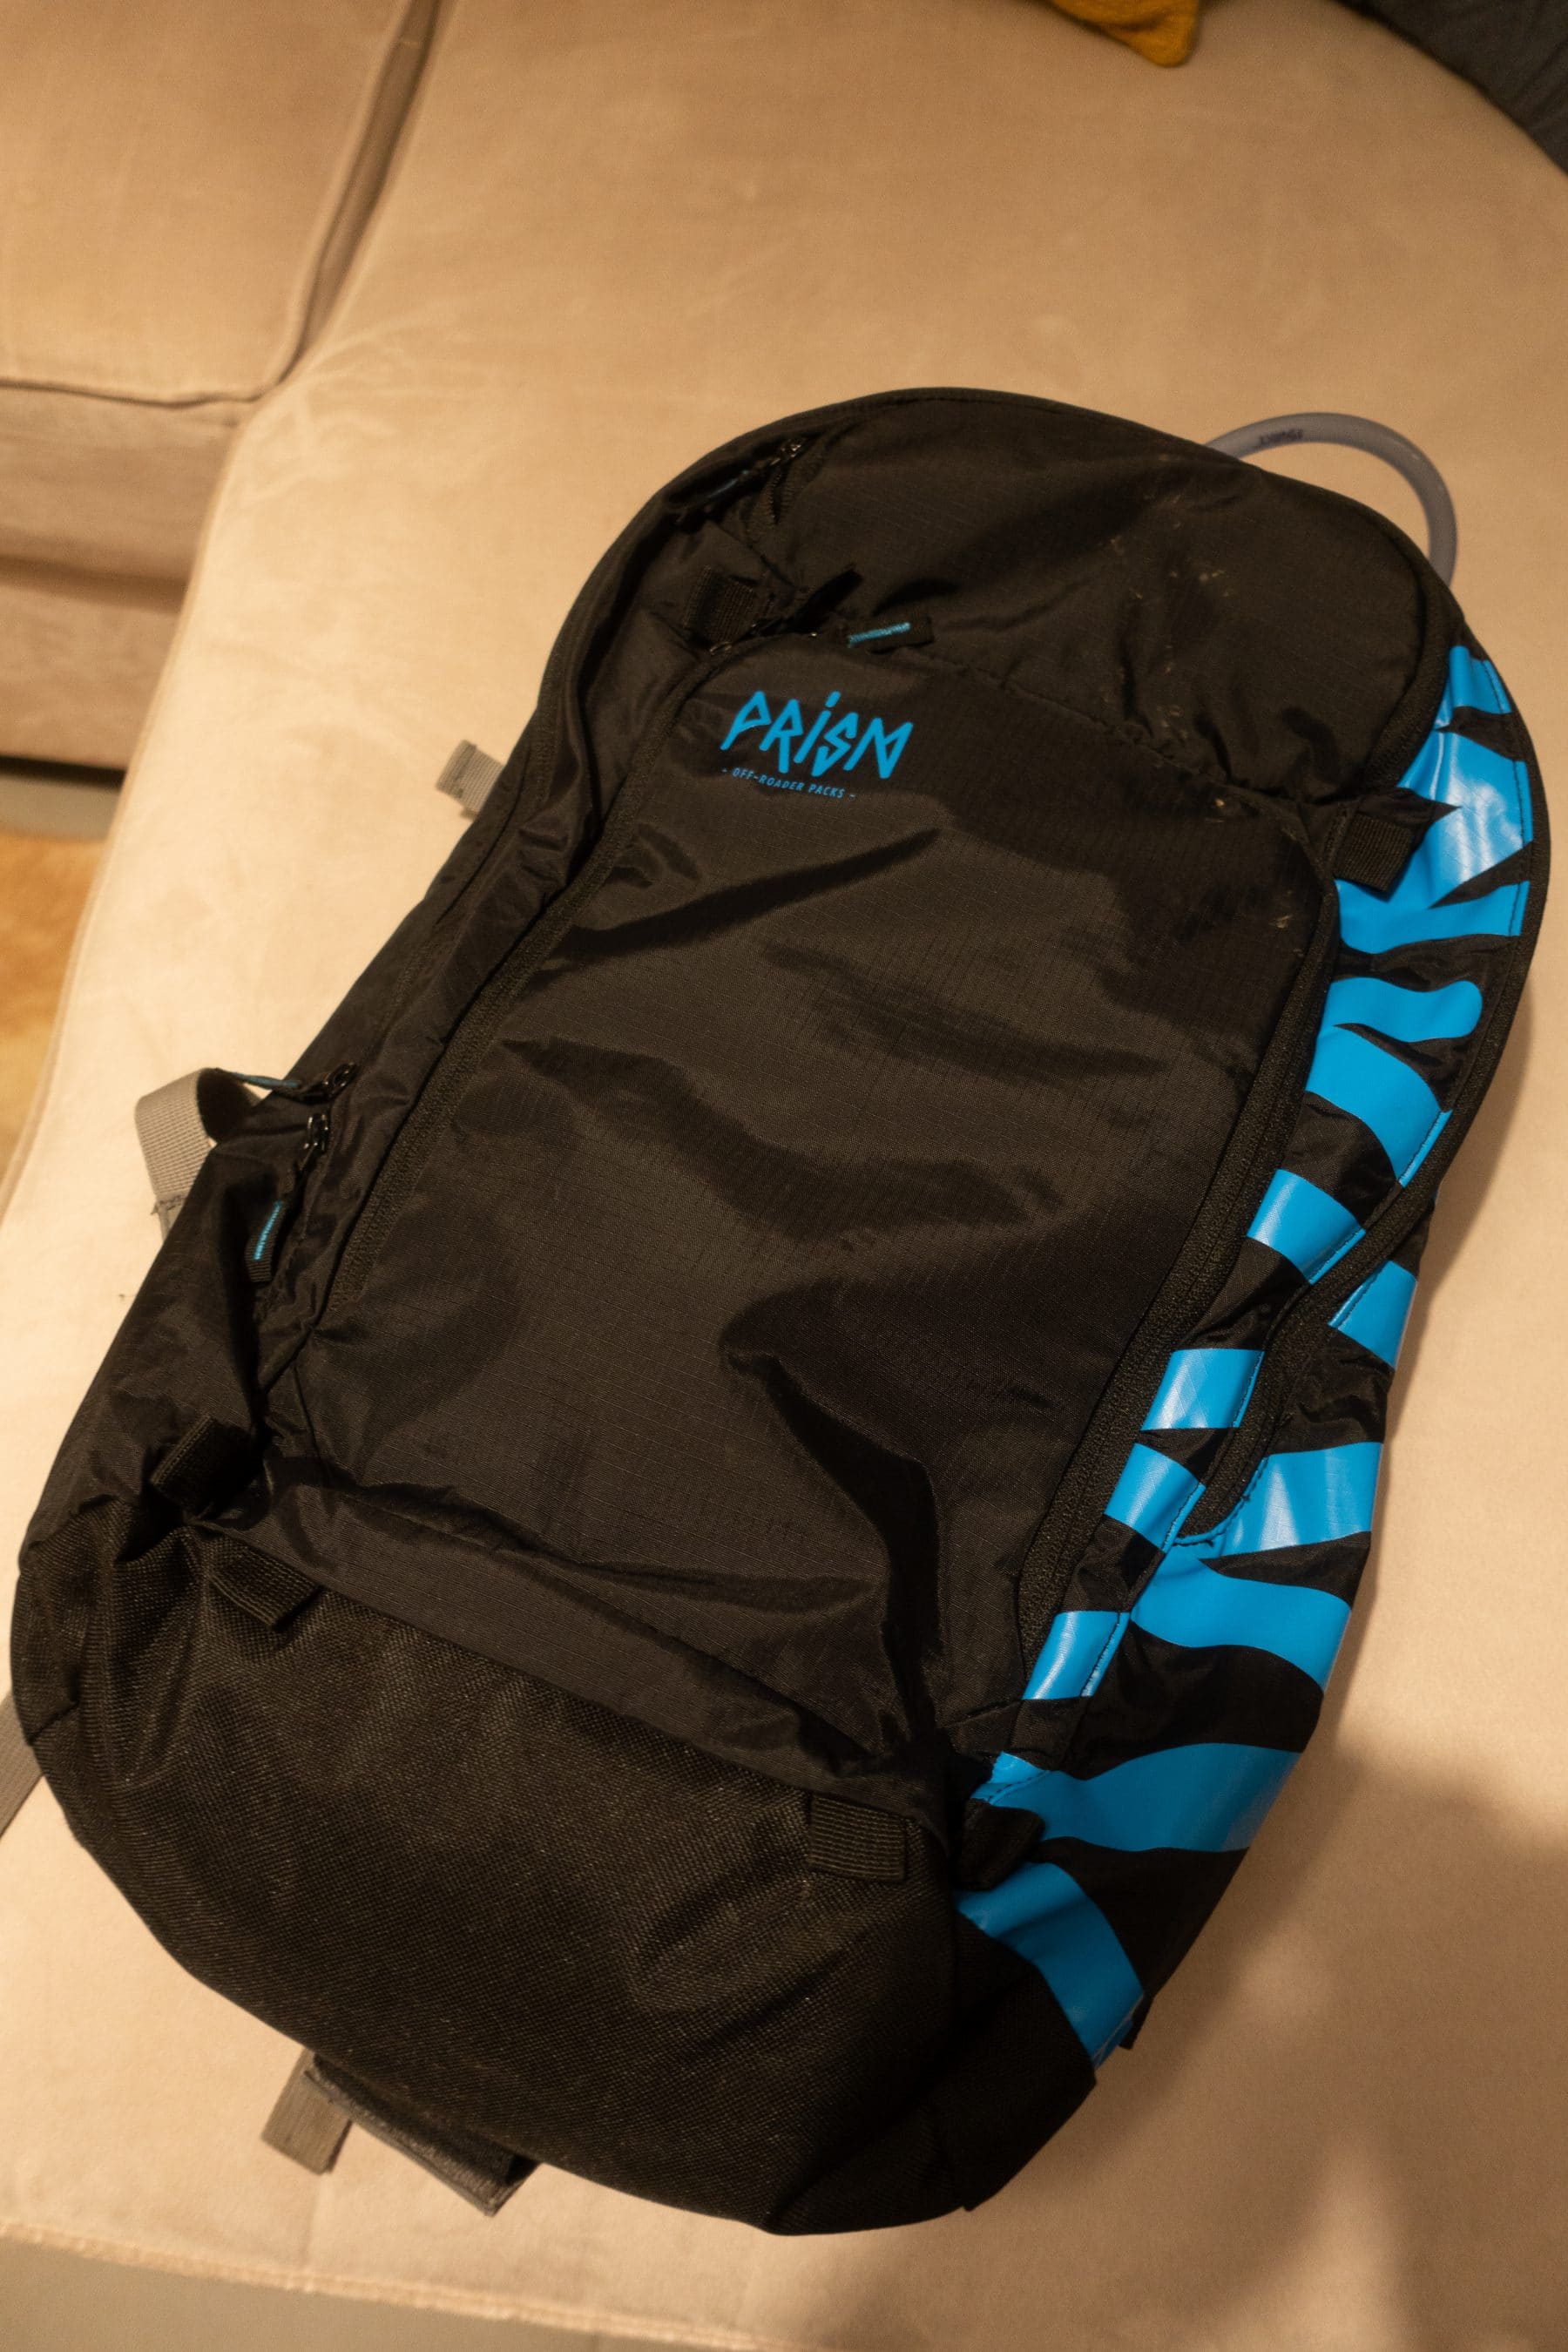 Test sac à dos modulable PRISM Off-road Co18